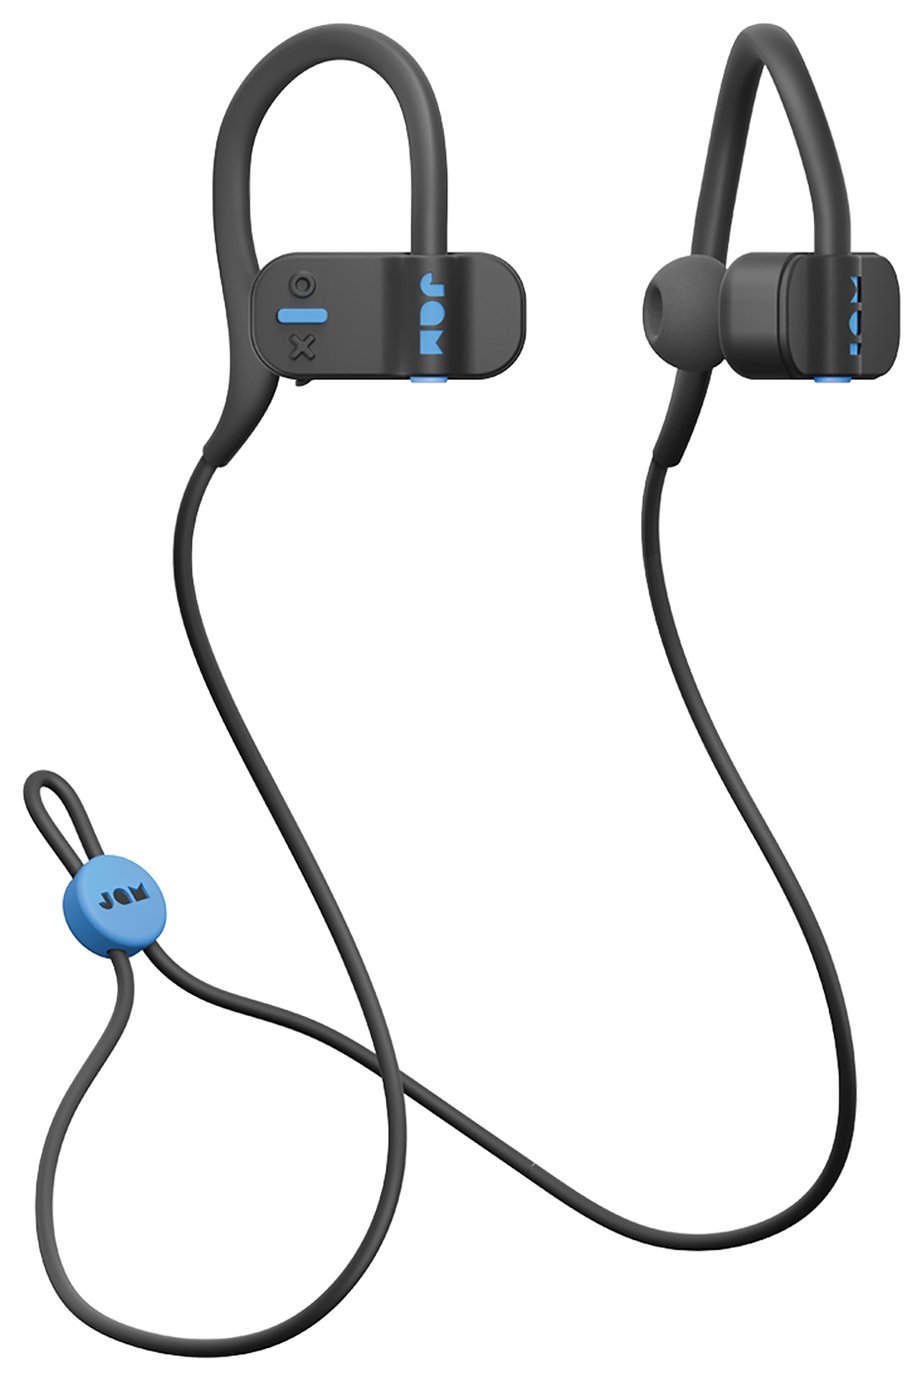 Jam Live Fast In-Ear Wireless Headphones Review